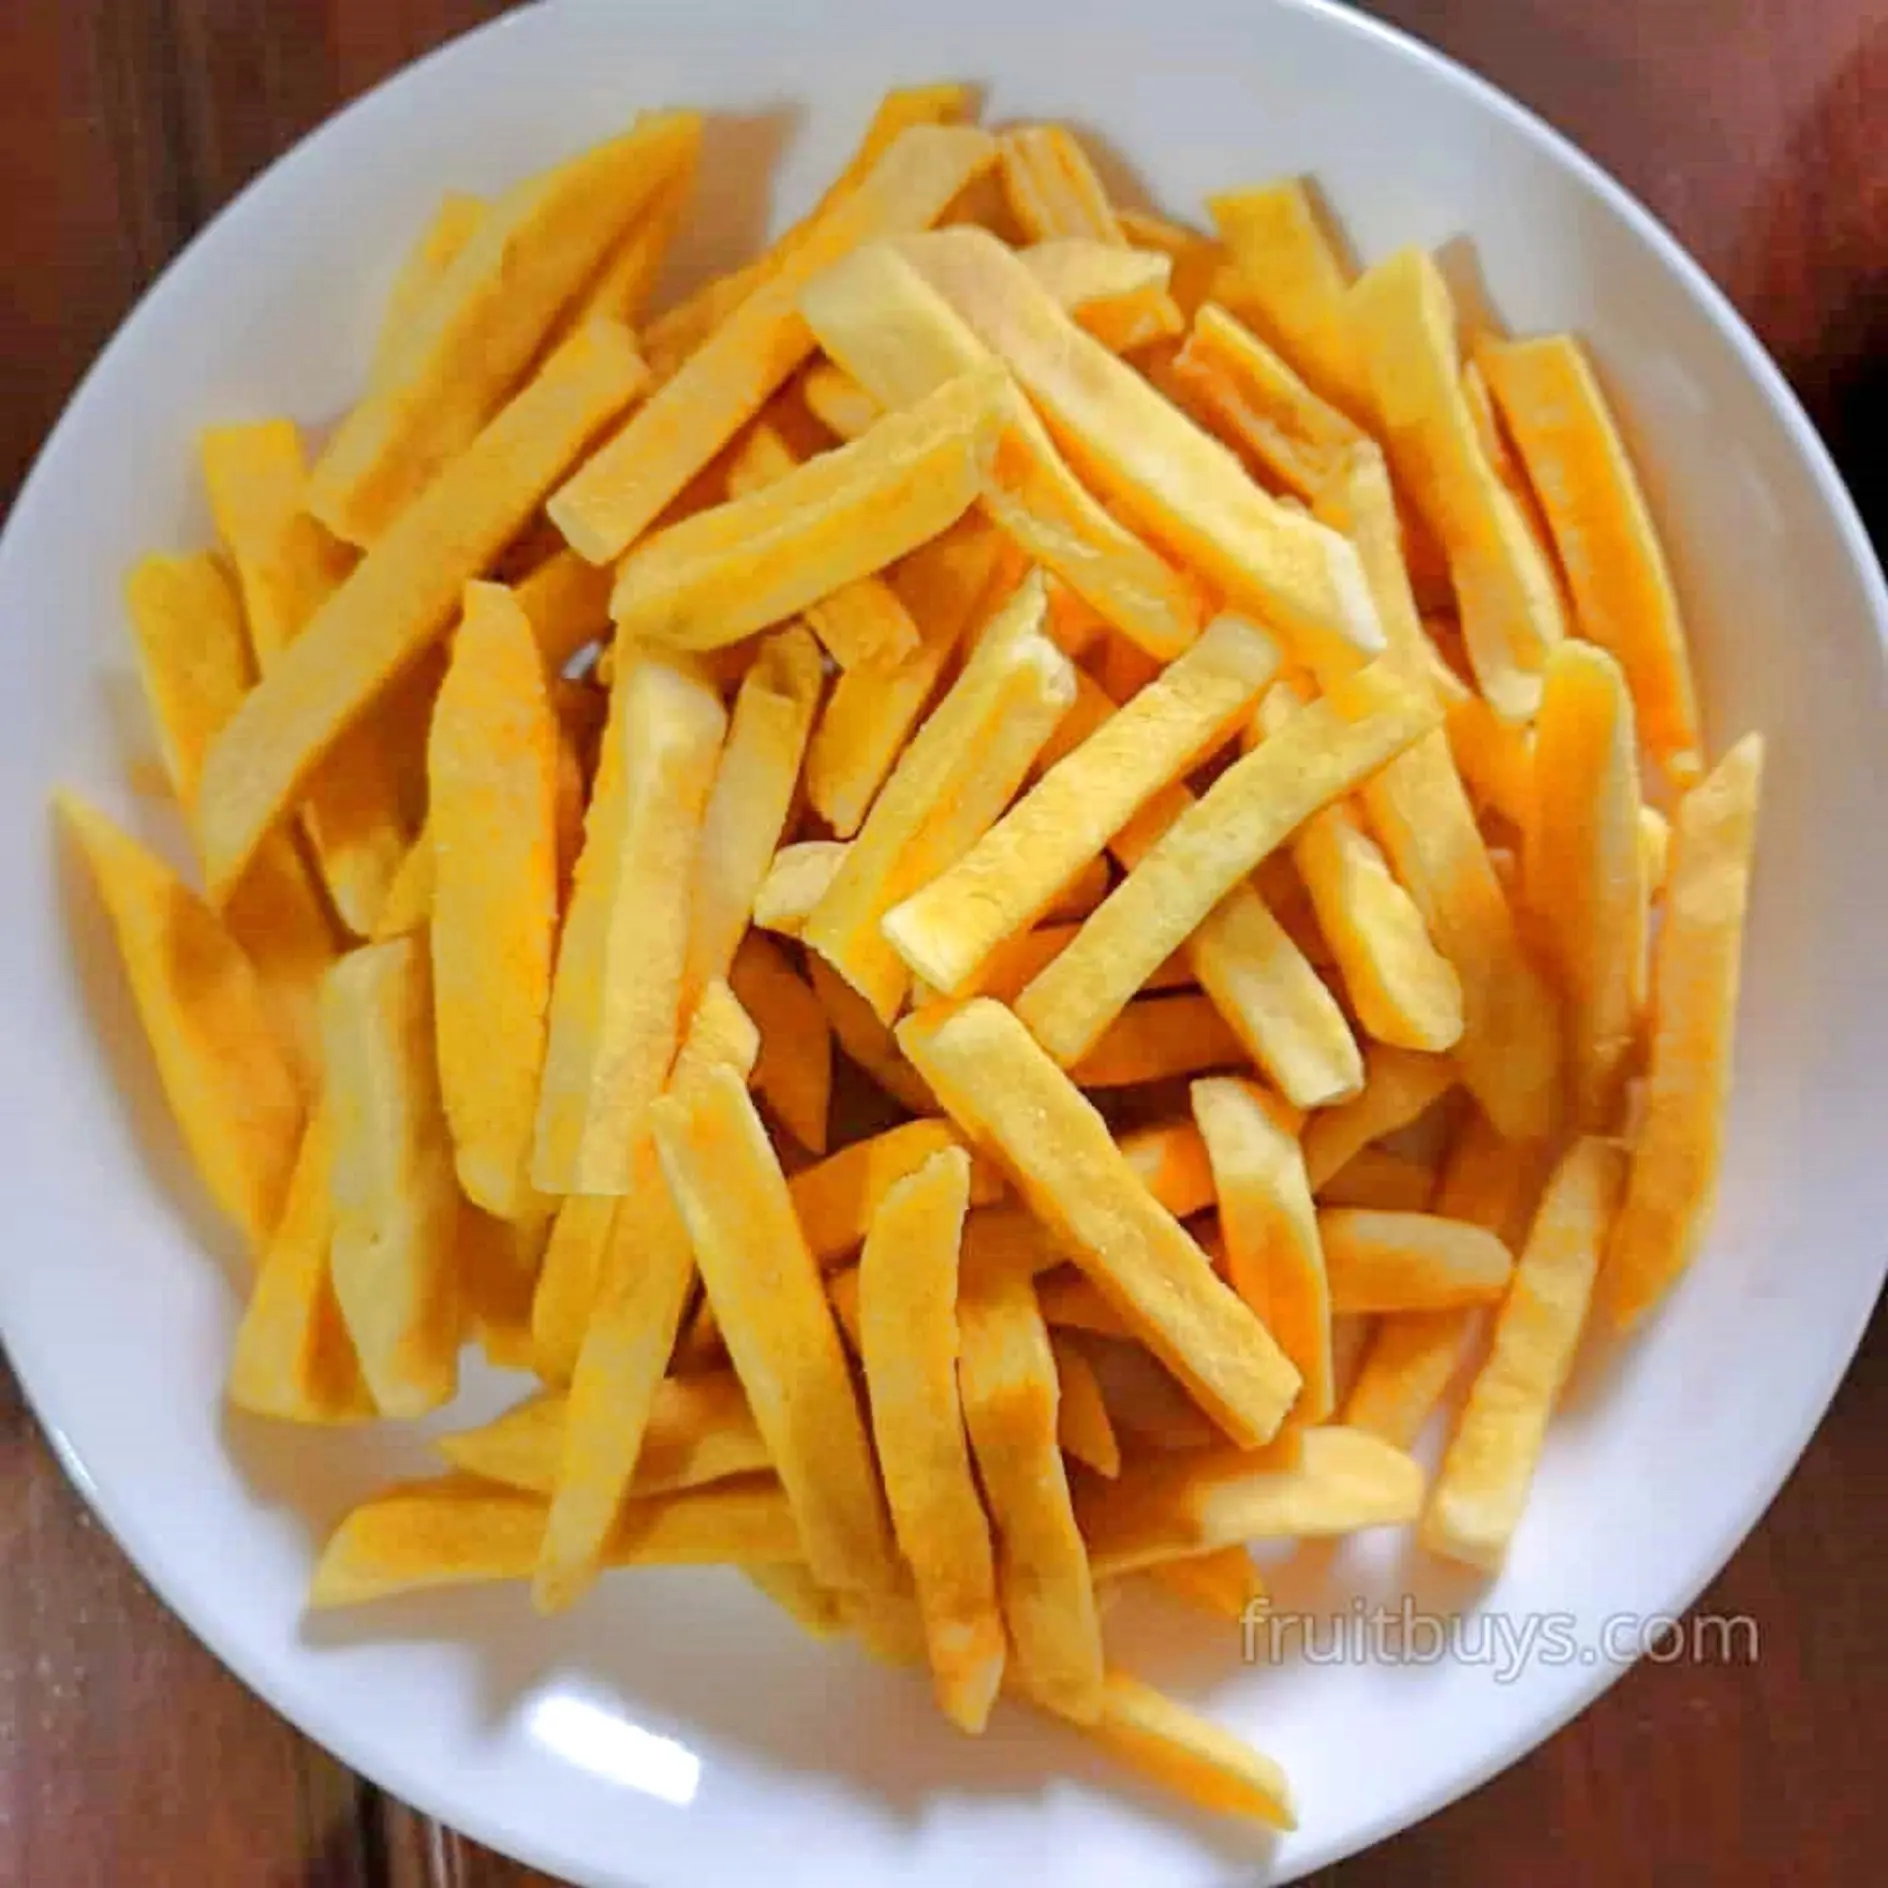 Vietnamese Yellow Sweet Potato Chips A Delicious and Healthy Snack with No Added Sugar for Weight Loss